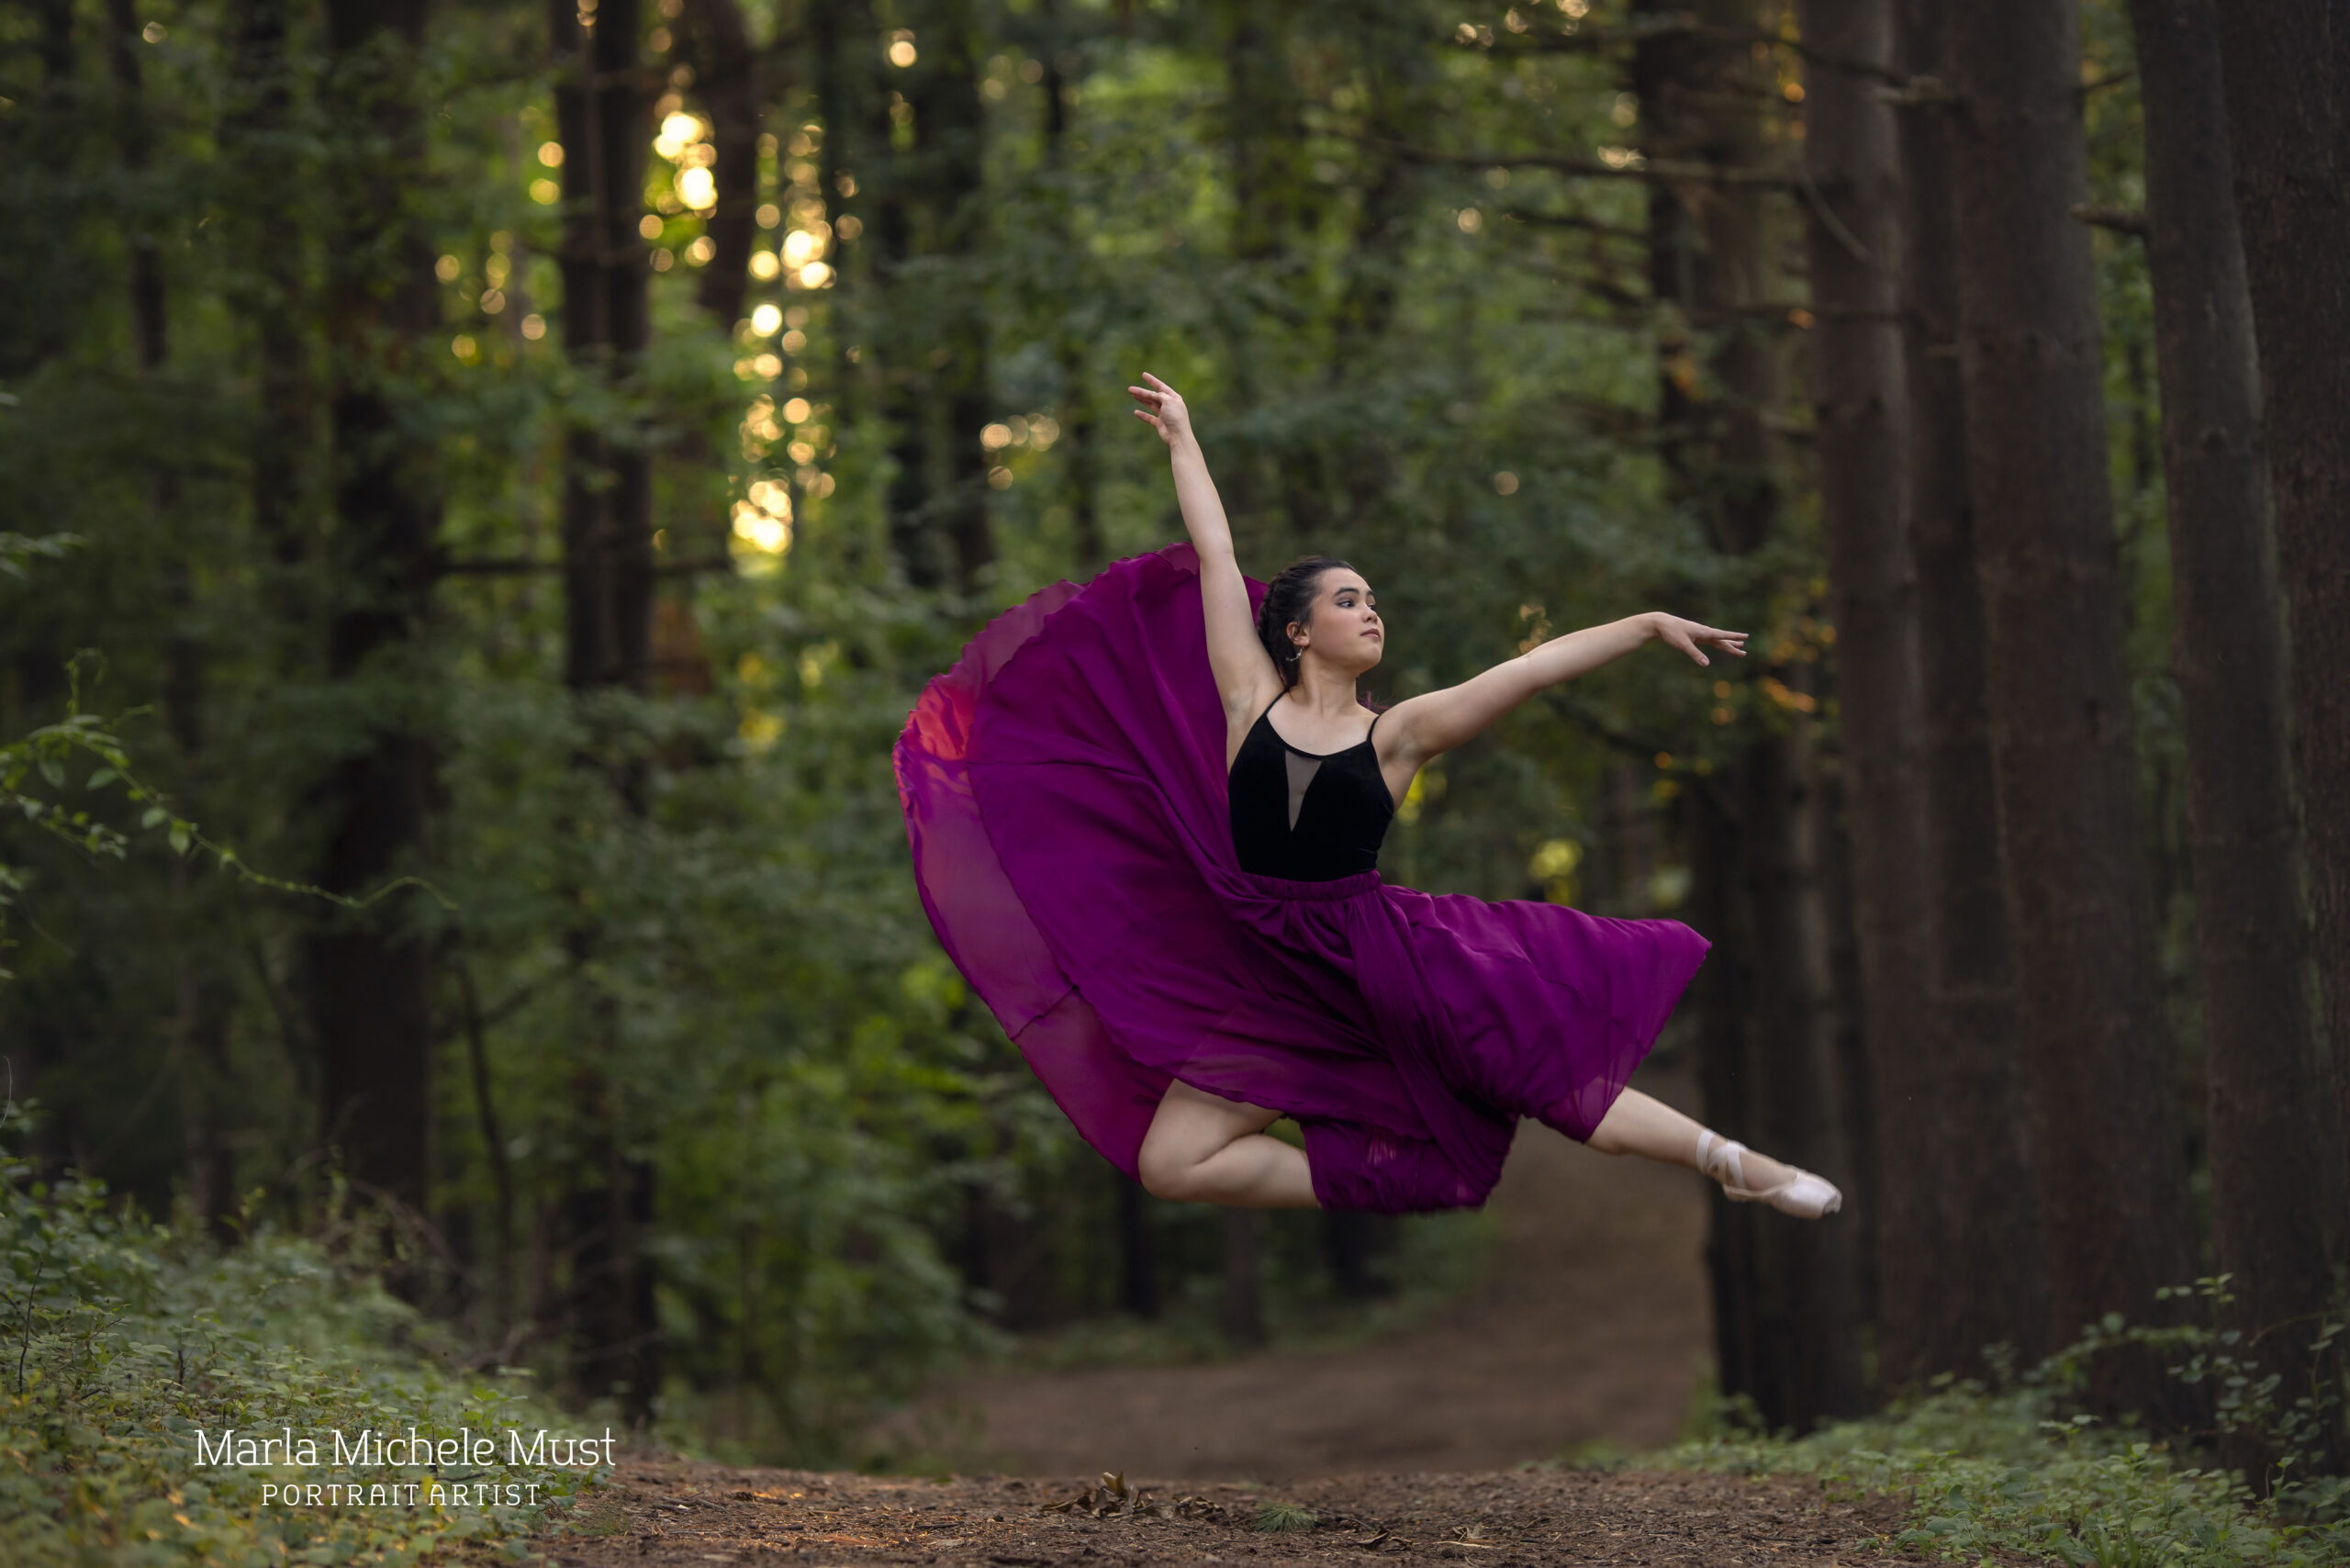 Dancer in a billowy dress jumps in the air on a Detroit forest path during a dance photoshoot, taken by a Michigan dance photographer.